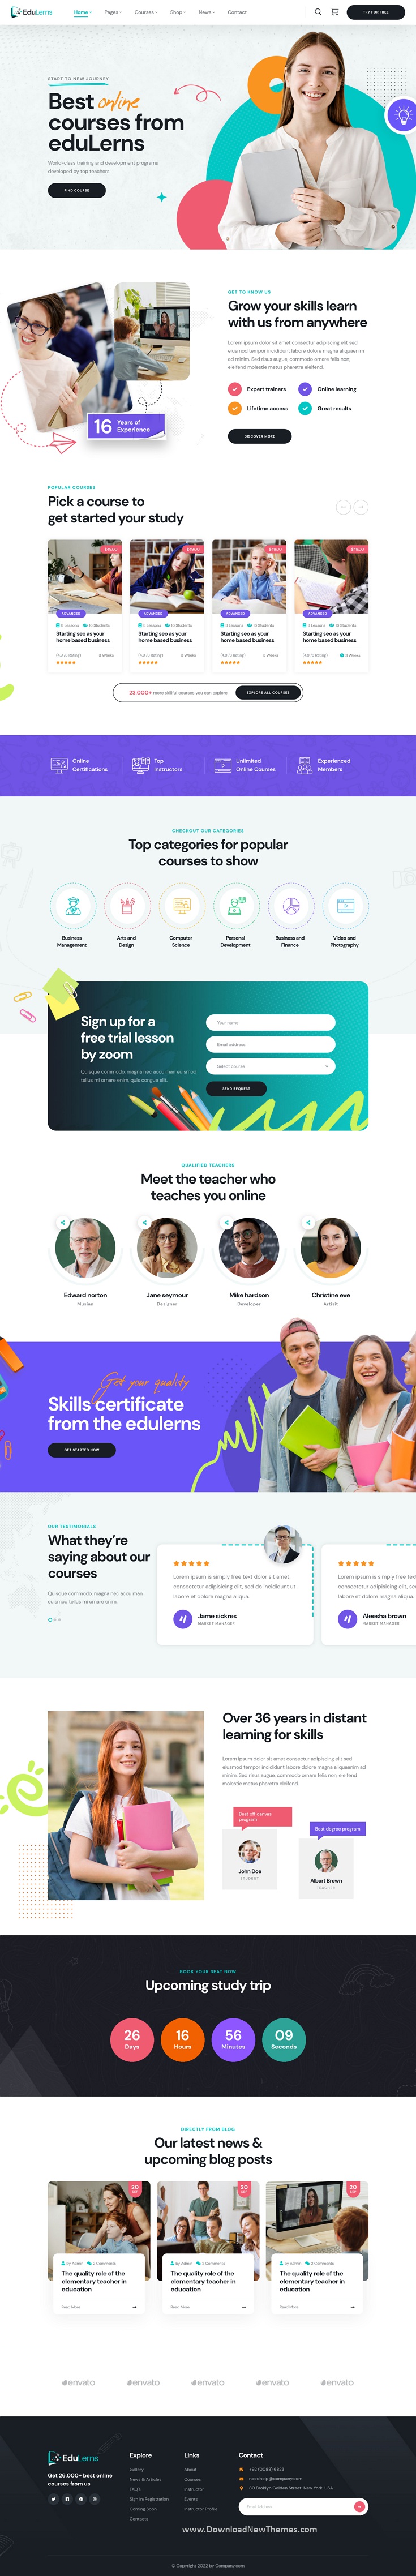 Edulerns - Education Courses HTML Template Review